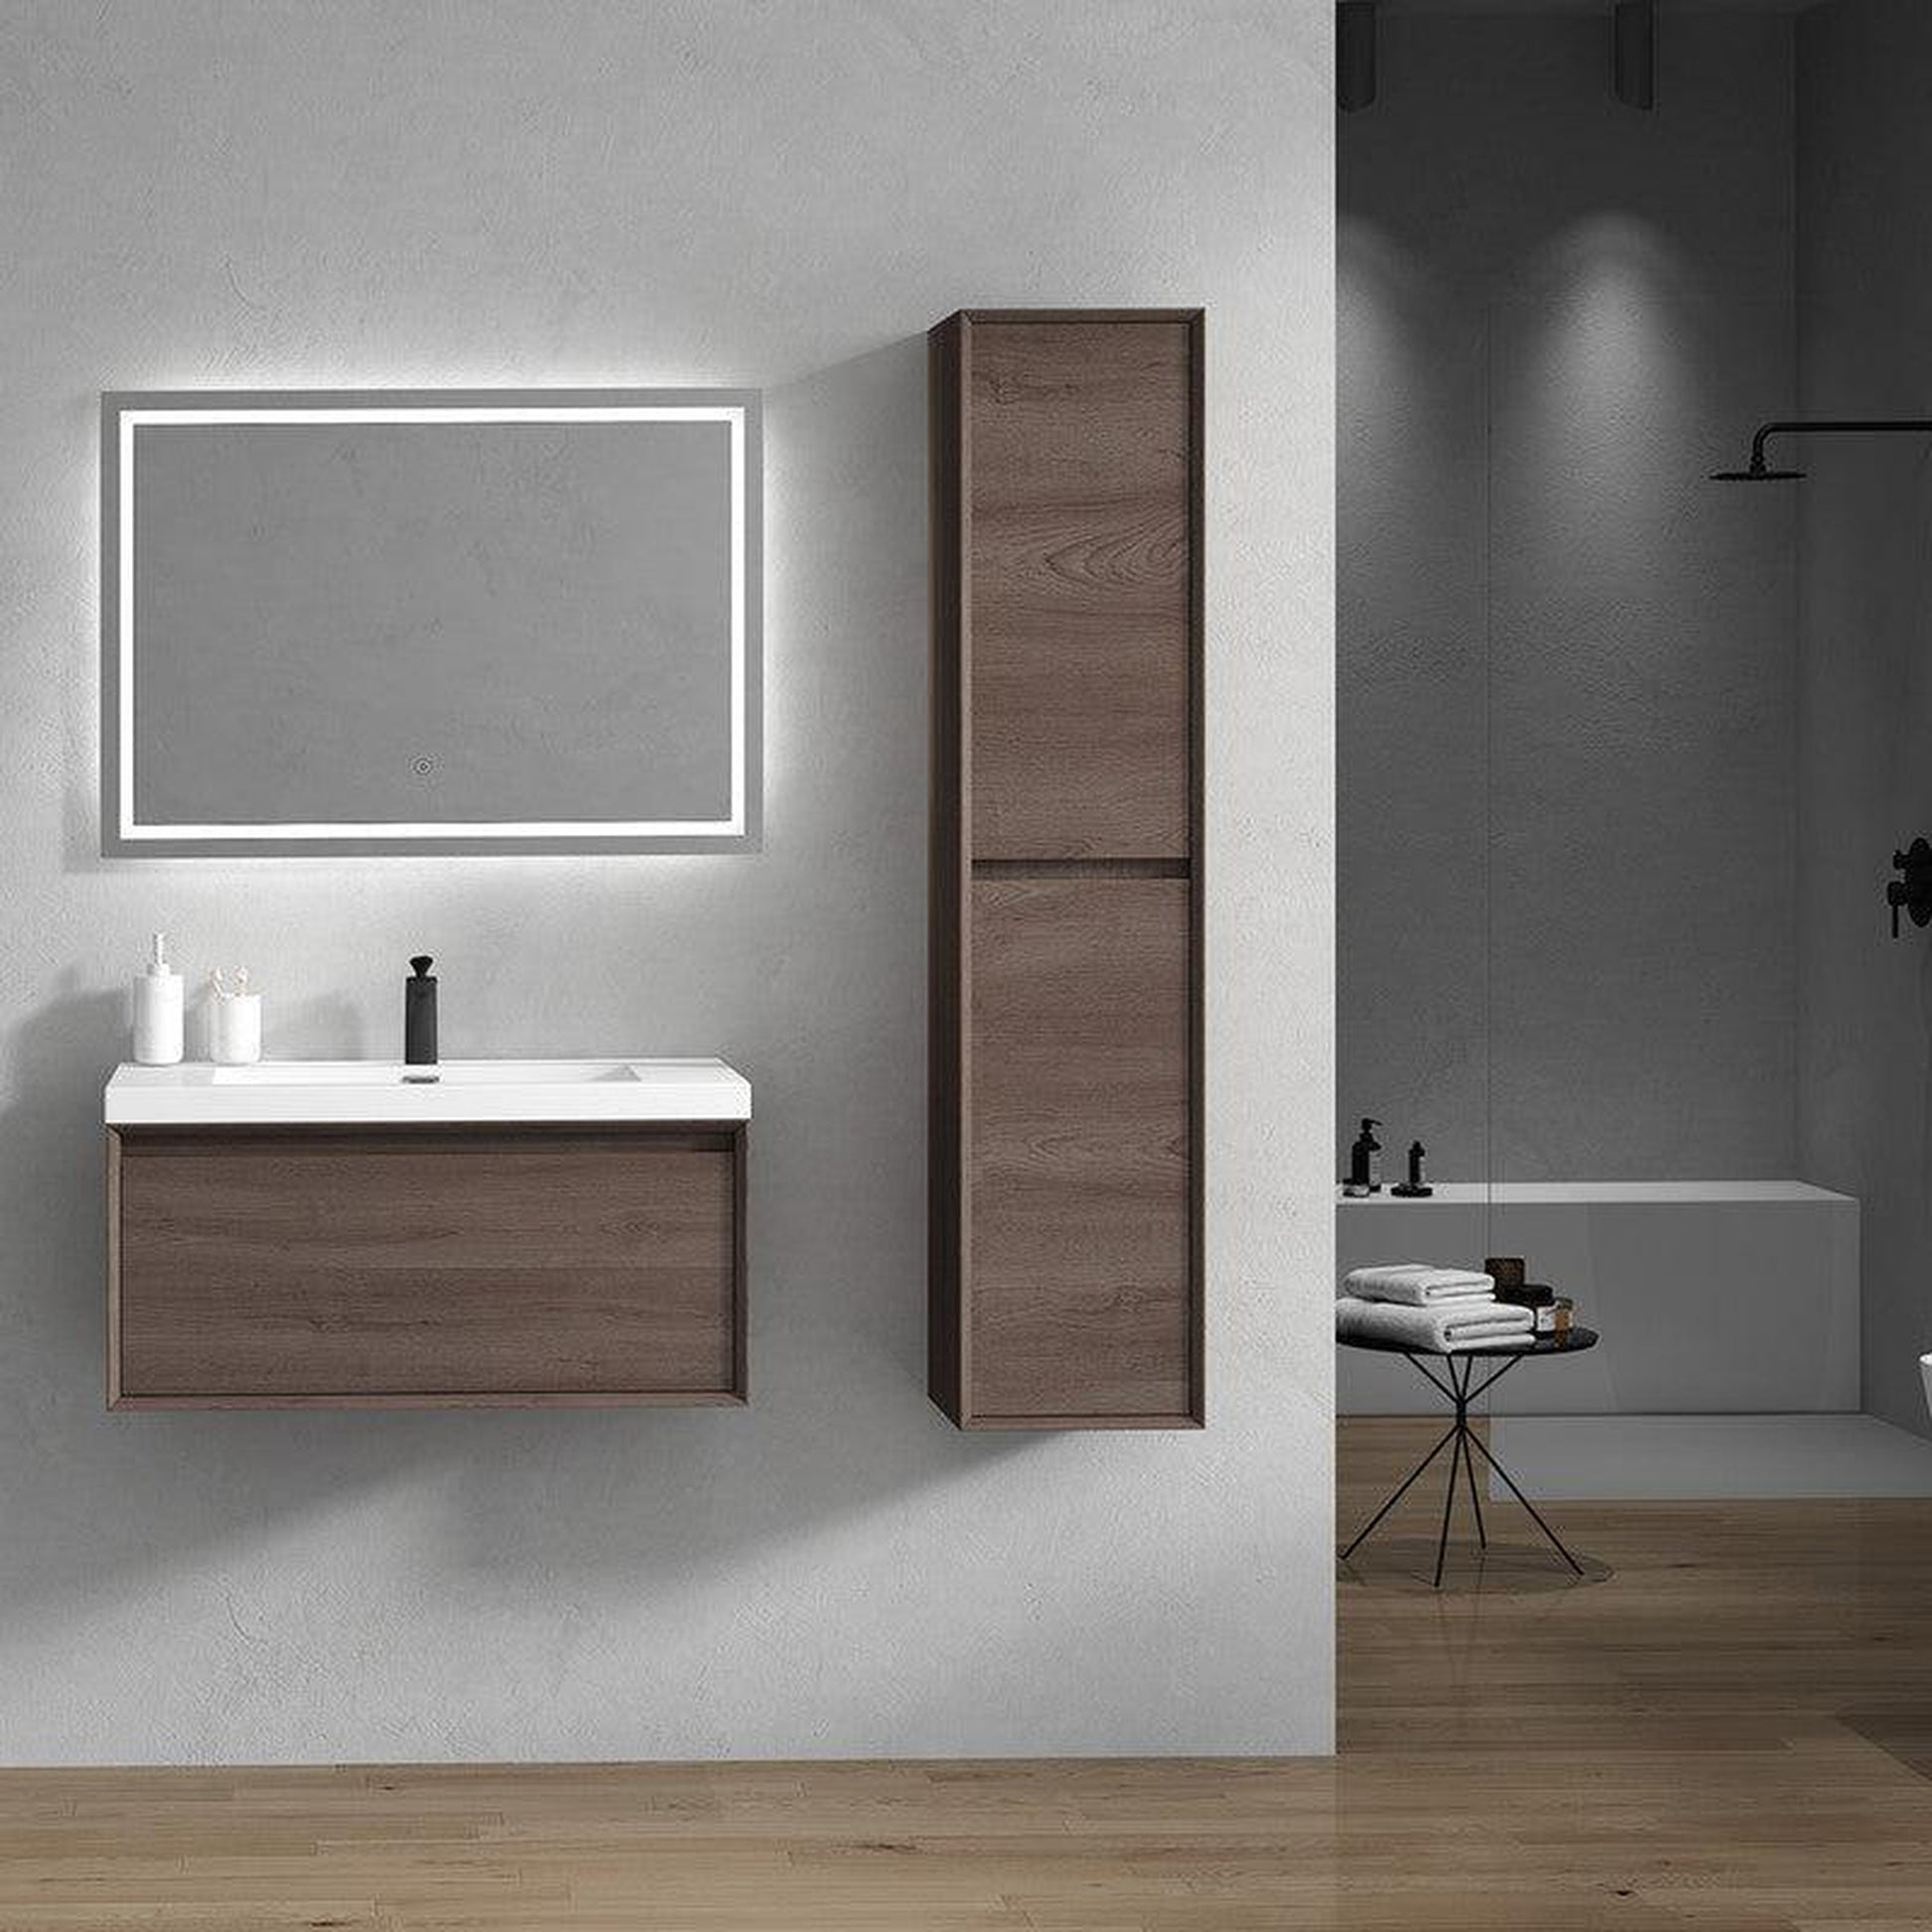 Moreno Bath BELLA 36" Red Oak Wall-Mounted Vanity With Single Reinforced White Acrylic Sink